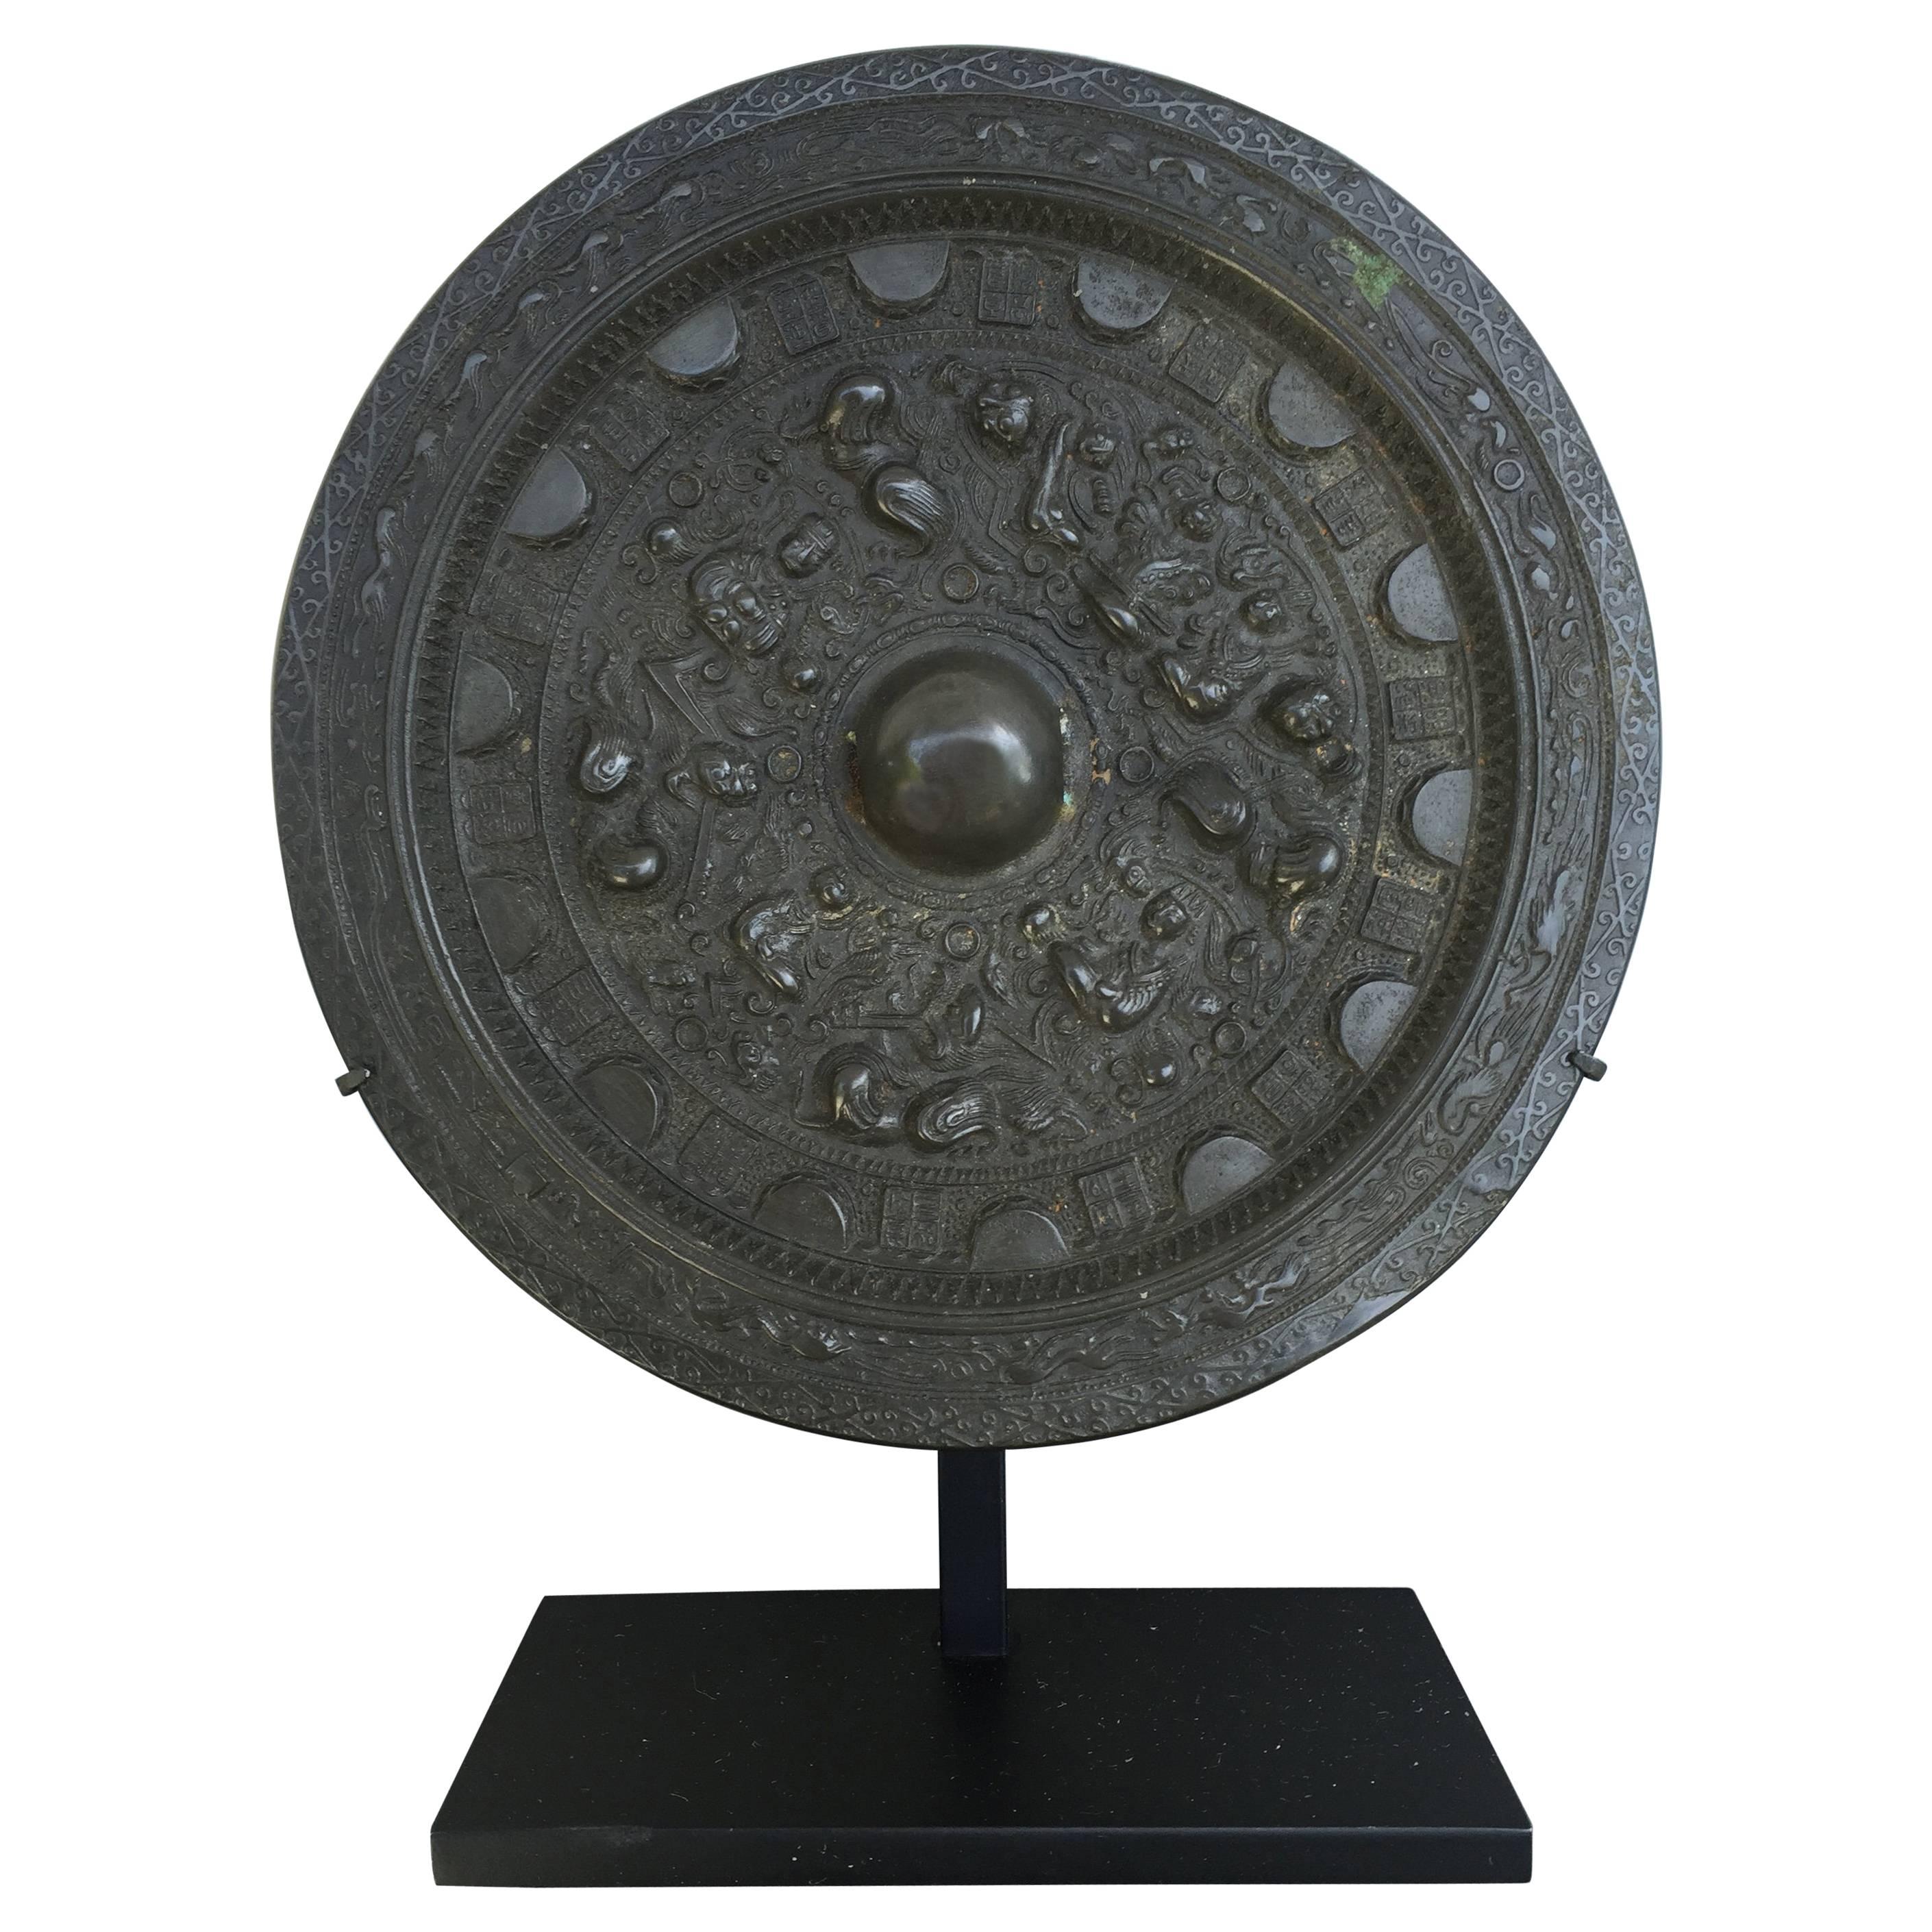 China Superb and Finely Cast Bronze Mirror Han Dynasty (206 BCE-220)